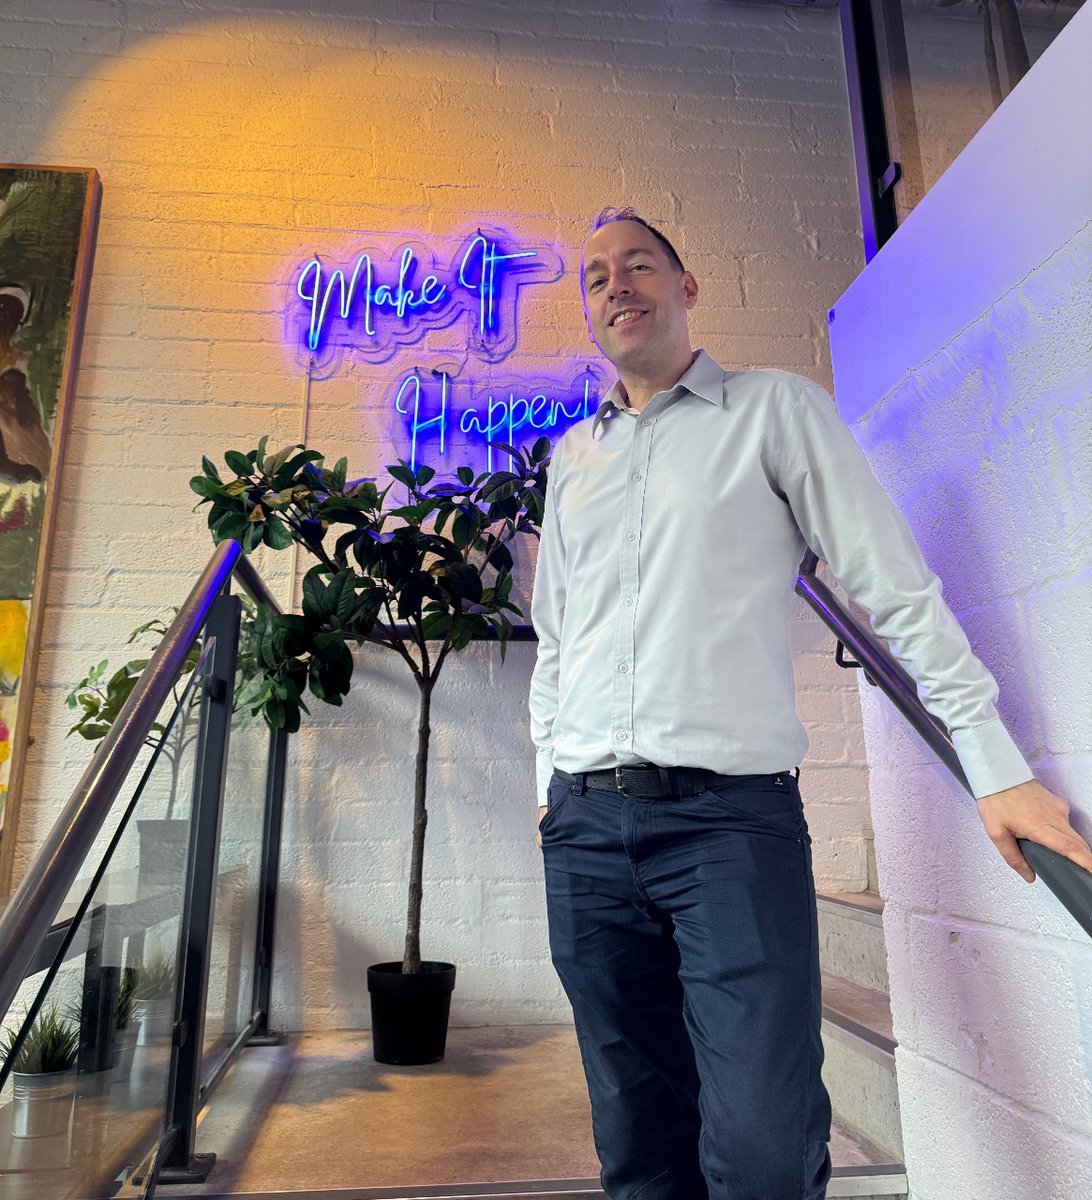 From Hubflow in London to Hubflow in Belfast 🛬

It was great to see our UK Facilities Manager Dale back visiting our Hubflow centres here in Belfast📍

Always ensuring our spaces are kept in prime condition. 

We look forward to having him back again soon! 🤝

#hubflow #belfast